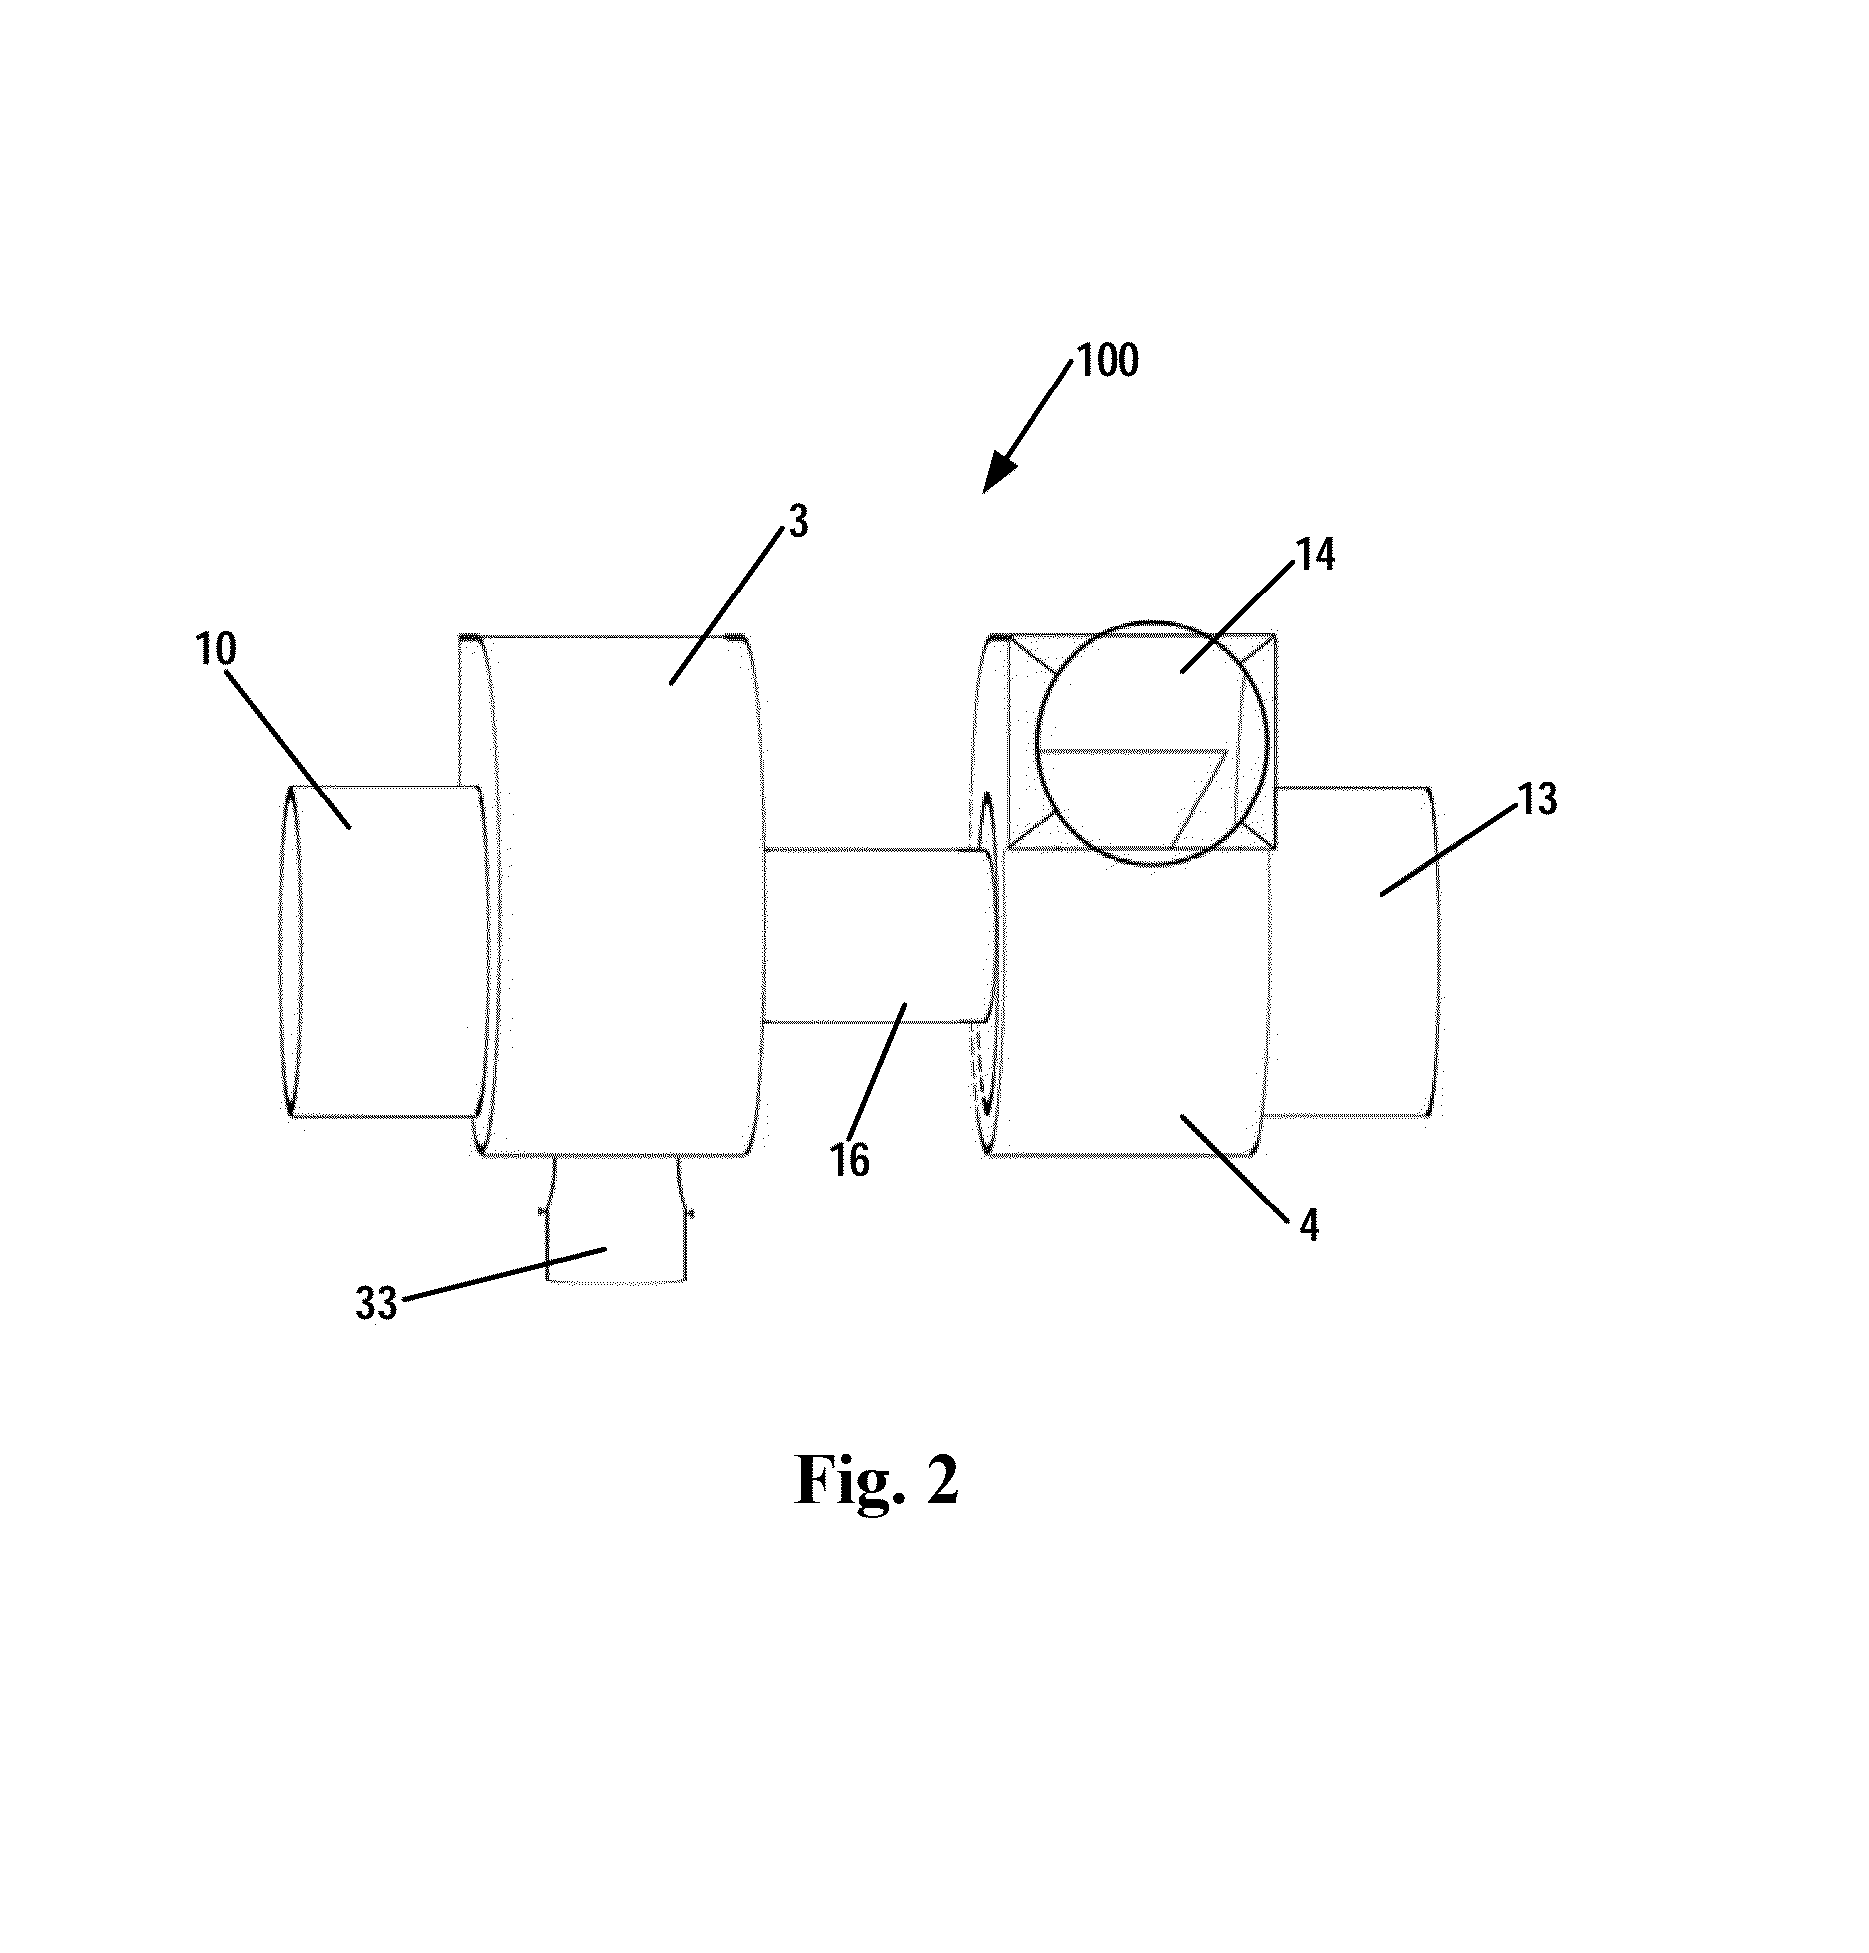 Turbocharging apparatuses and vehicles using the same